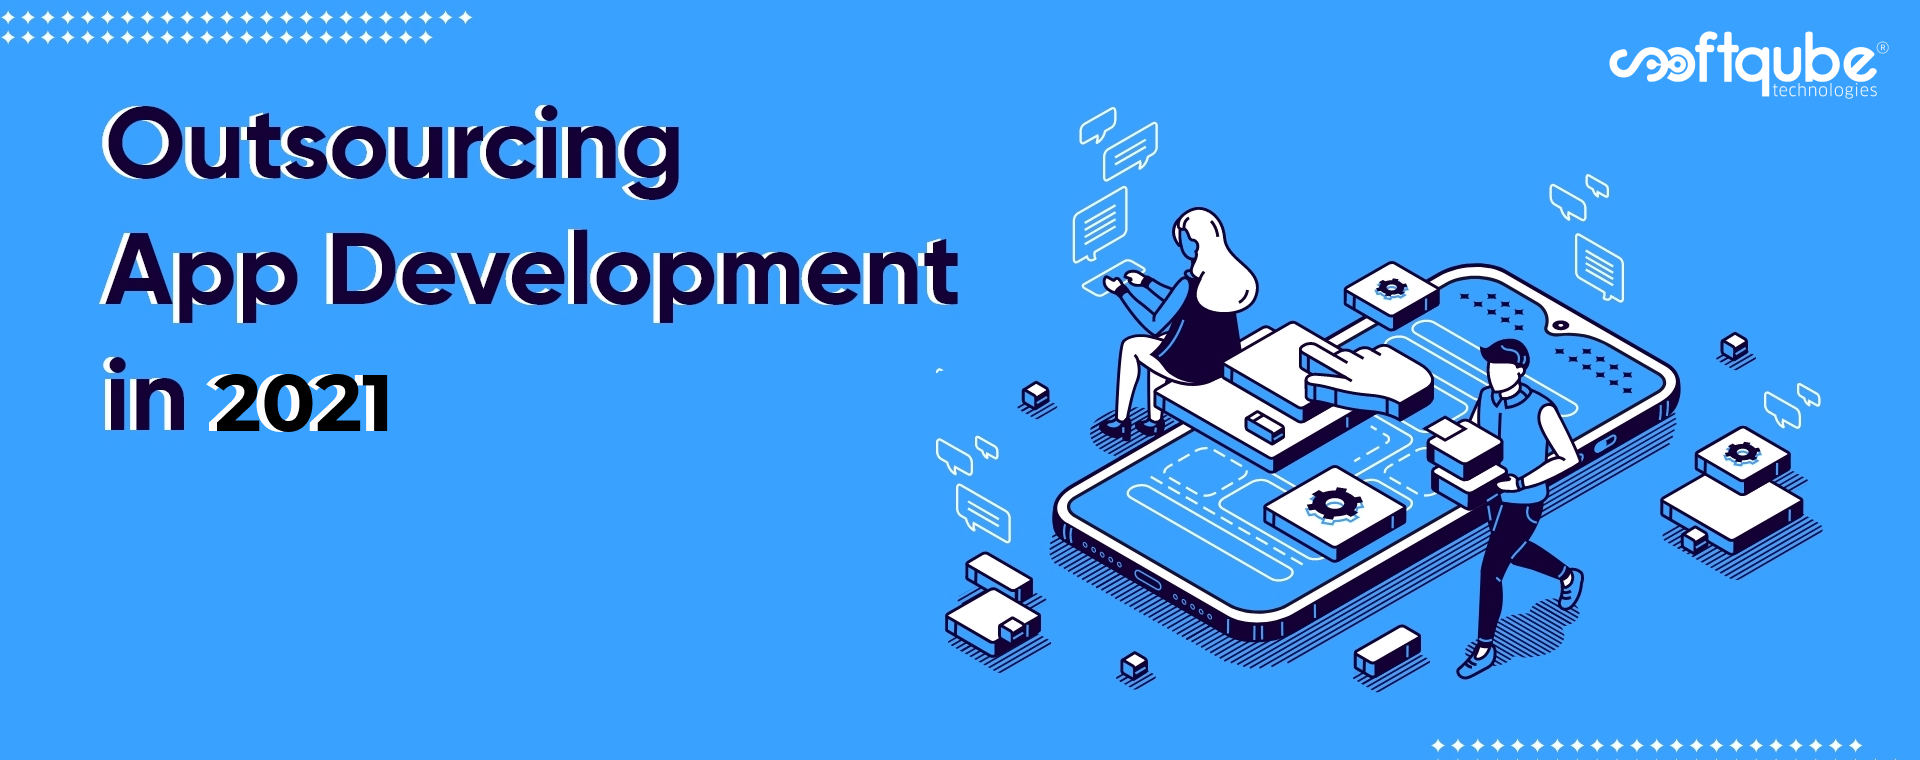 Let Us Know About The Outsource of Mobile App Development In 2021